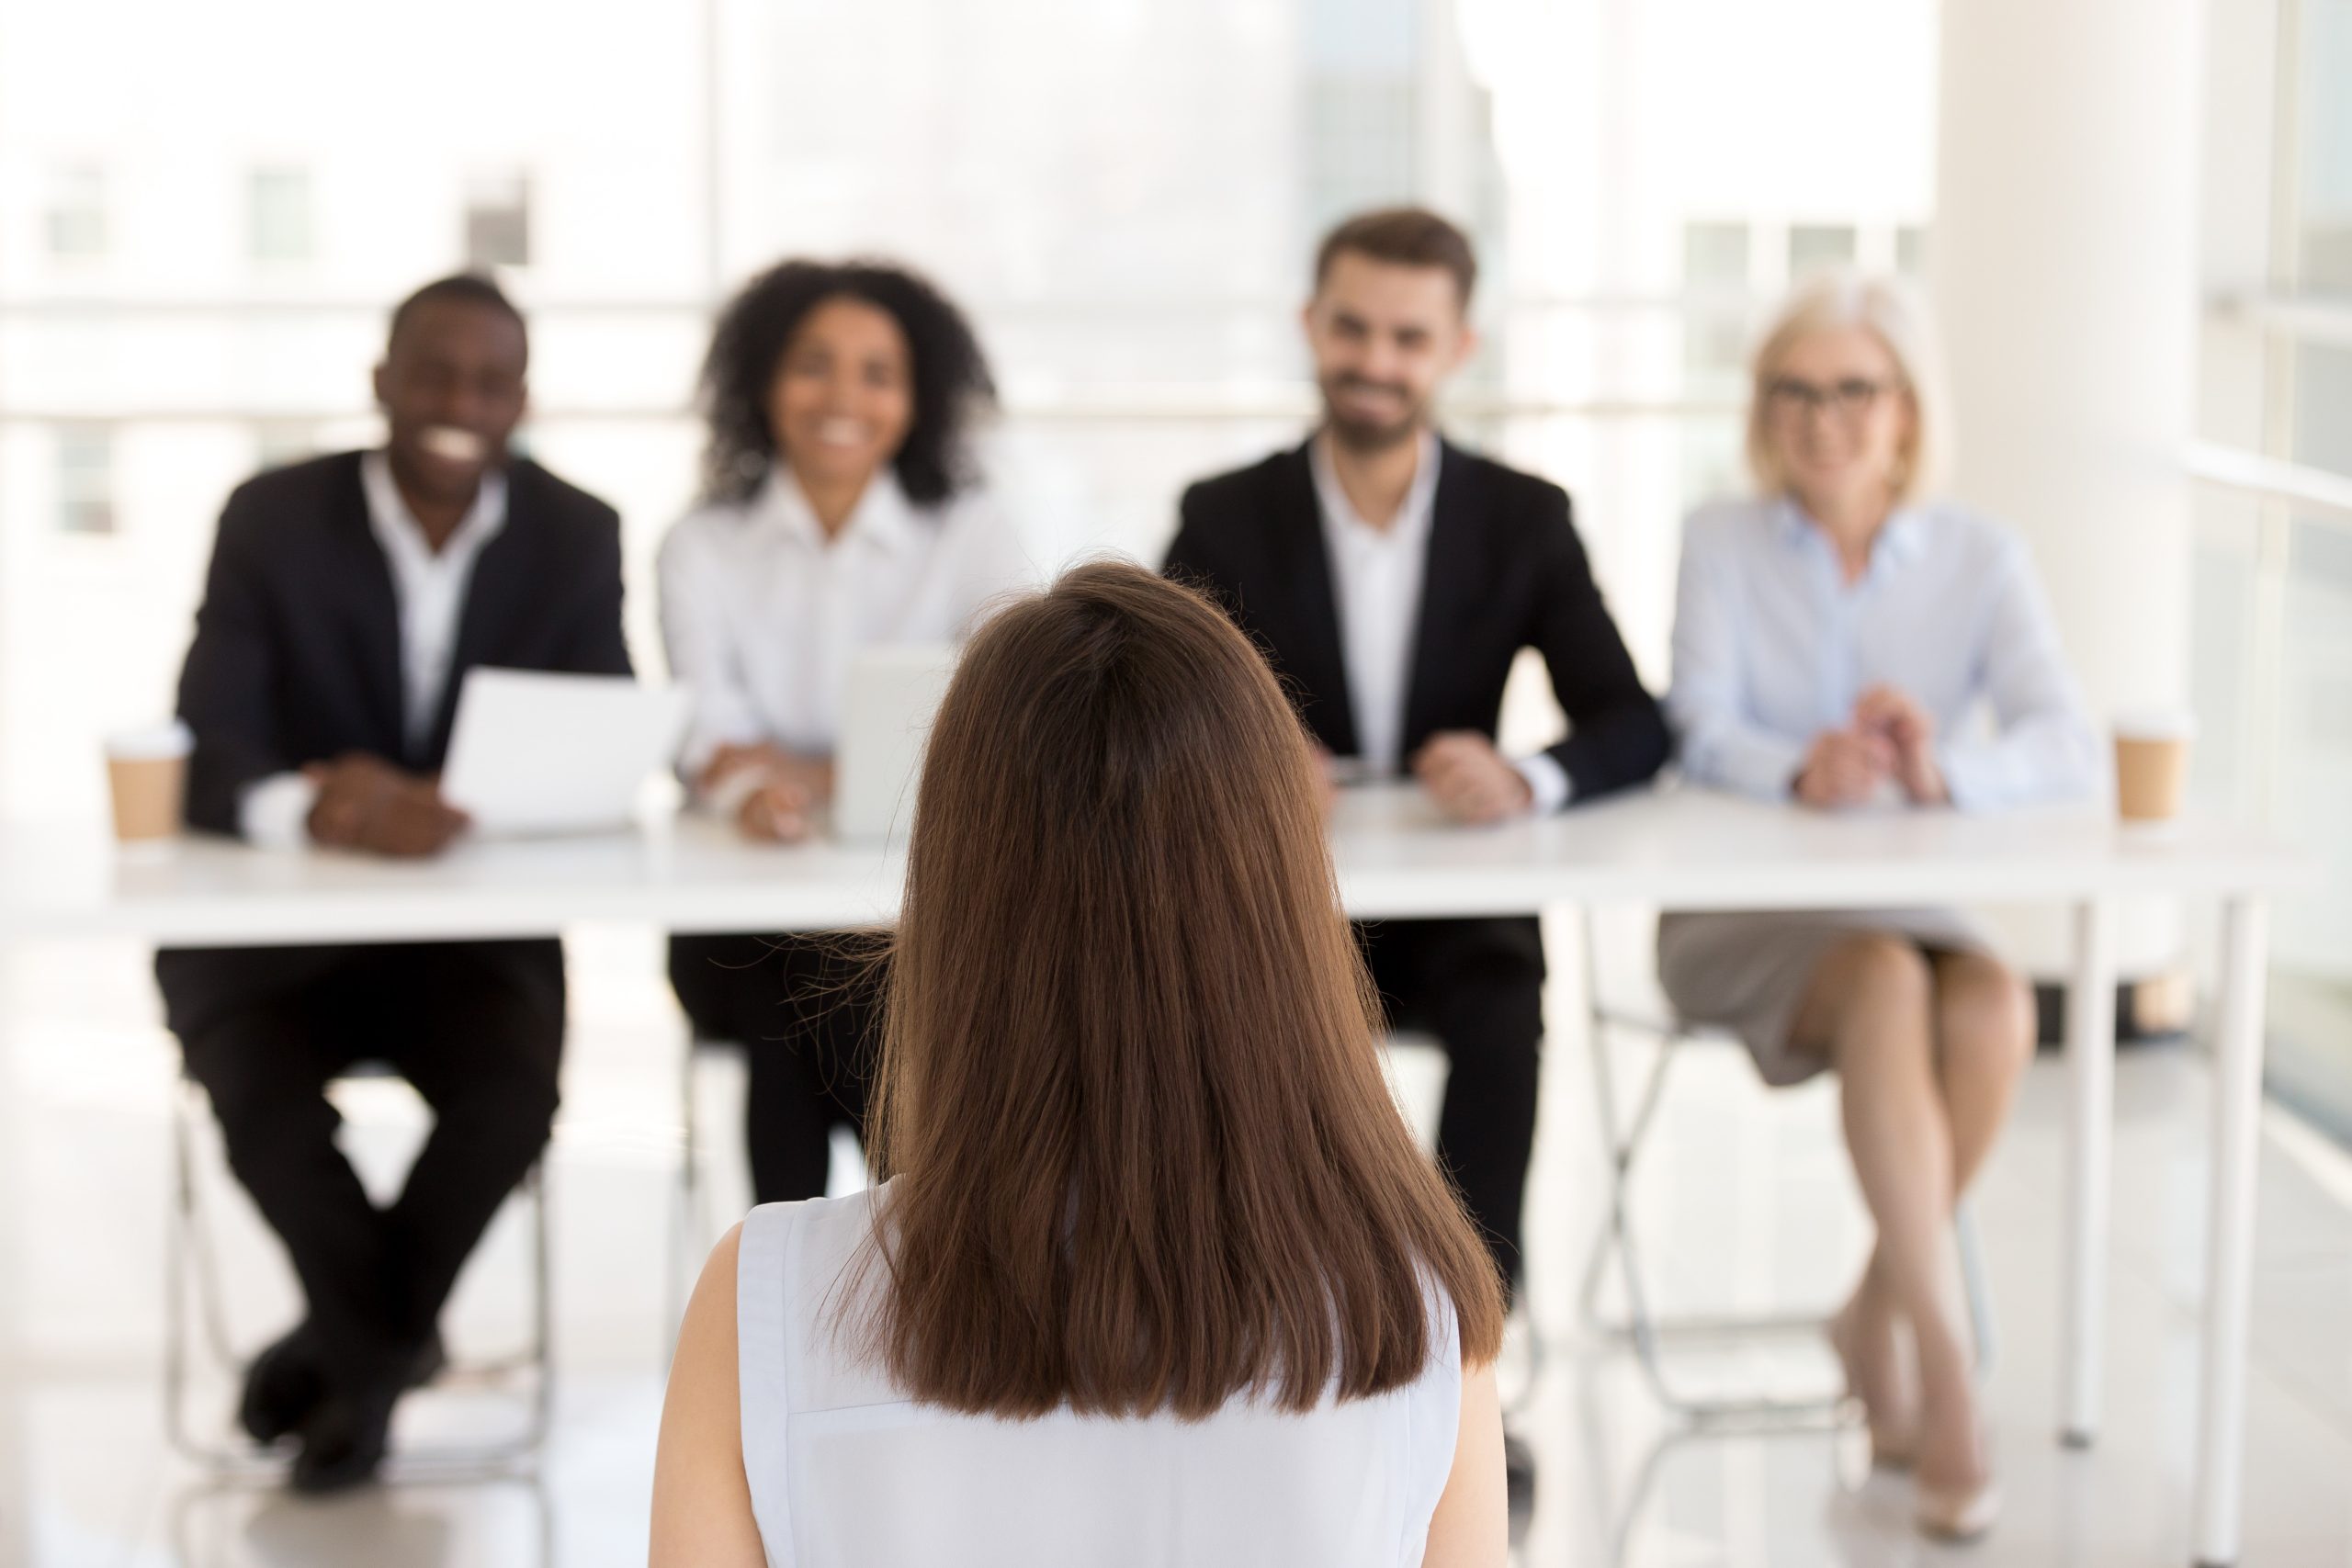 A woman sits with her back to the camera in front of a diverse hiring panel of four people.